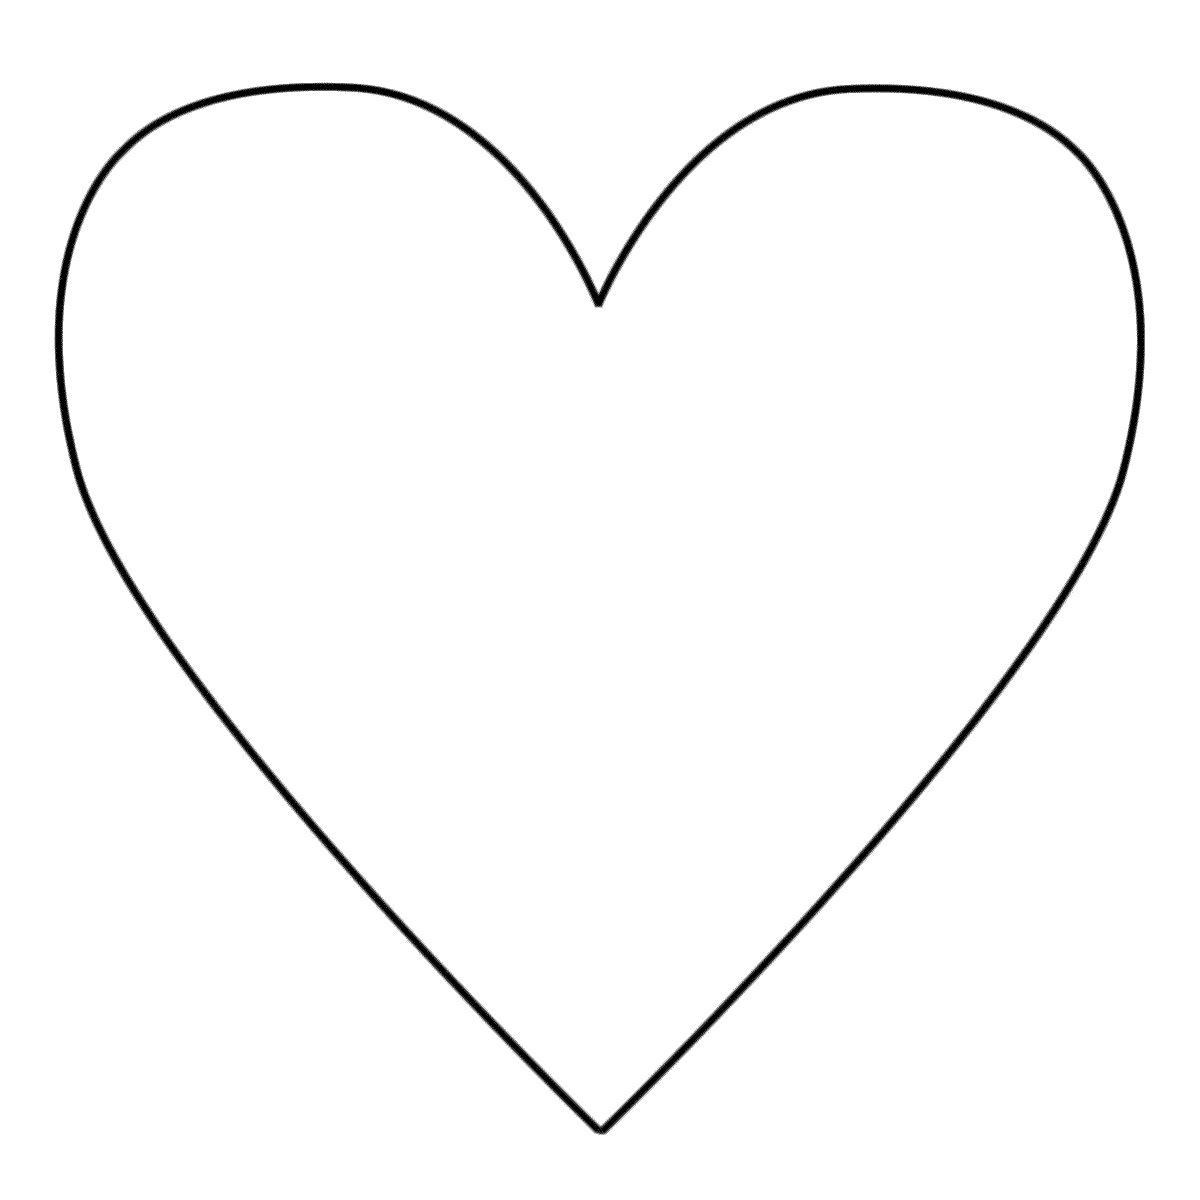 coloring pages for hearts free printable heart coloring pages for kids coloring for pages hearts 